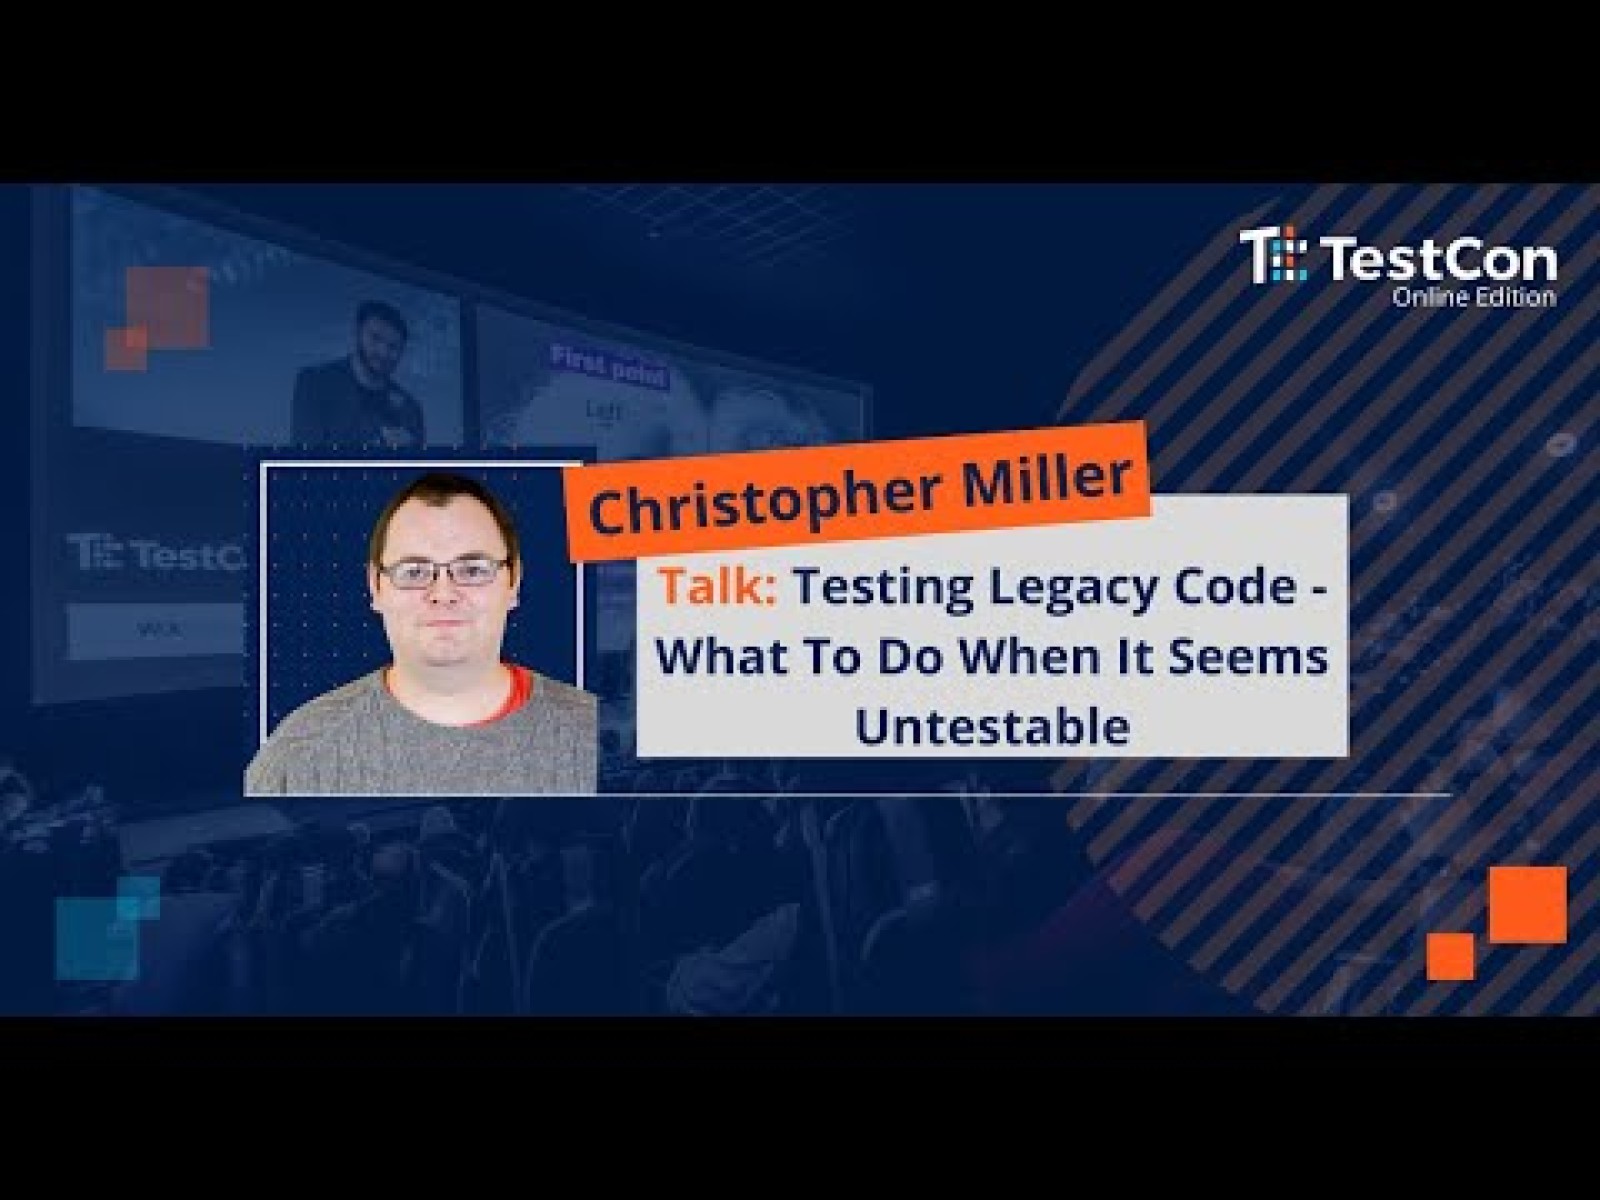 Testing Legacy Code: What To Do When It Seems Untestable